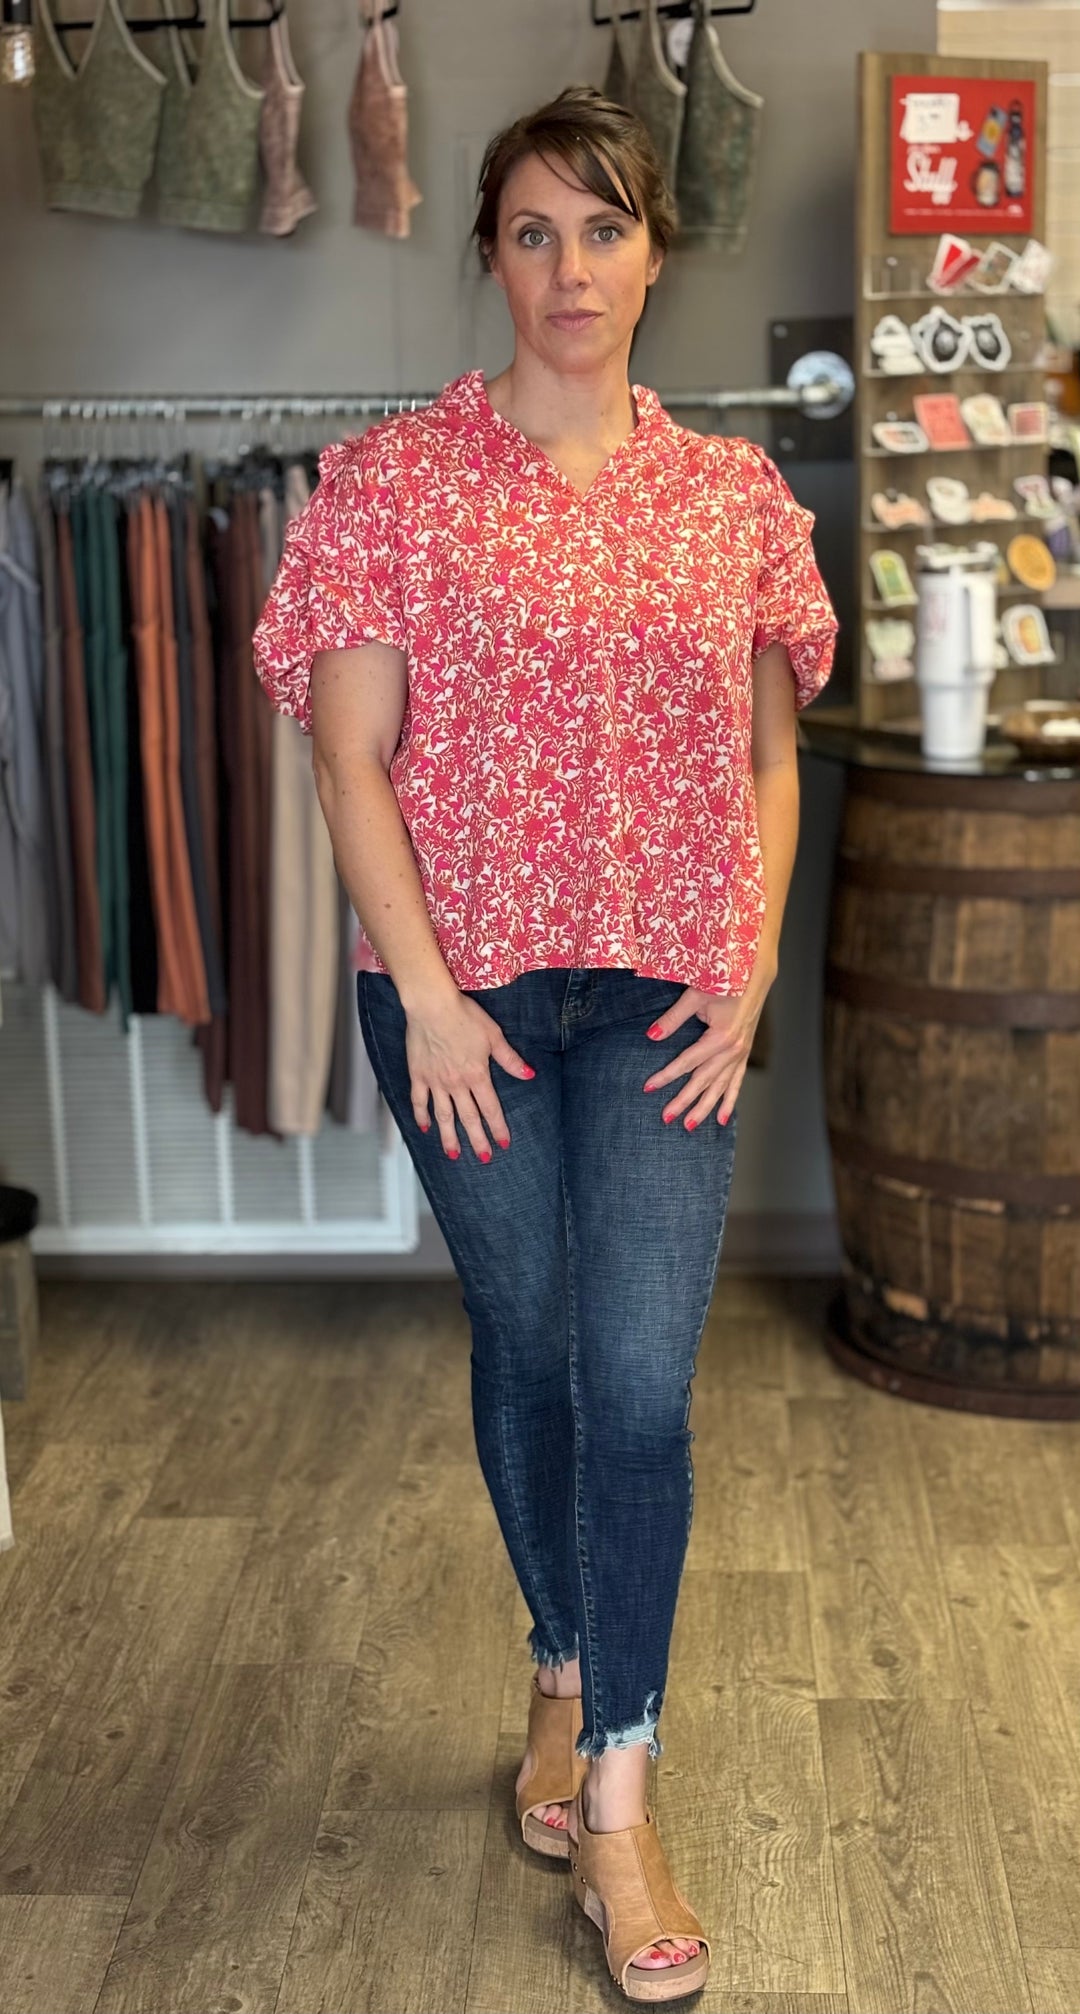 Petal Princess Ruffled Sleeved Top-Short Sleeves-Entro-Evergreen Boutique, Women’s Fashion Boutique in Santa Claus, Indiana